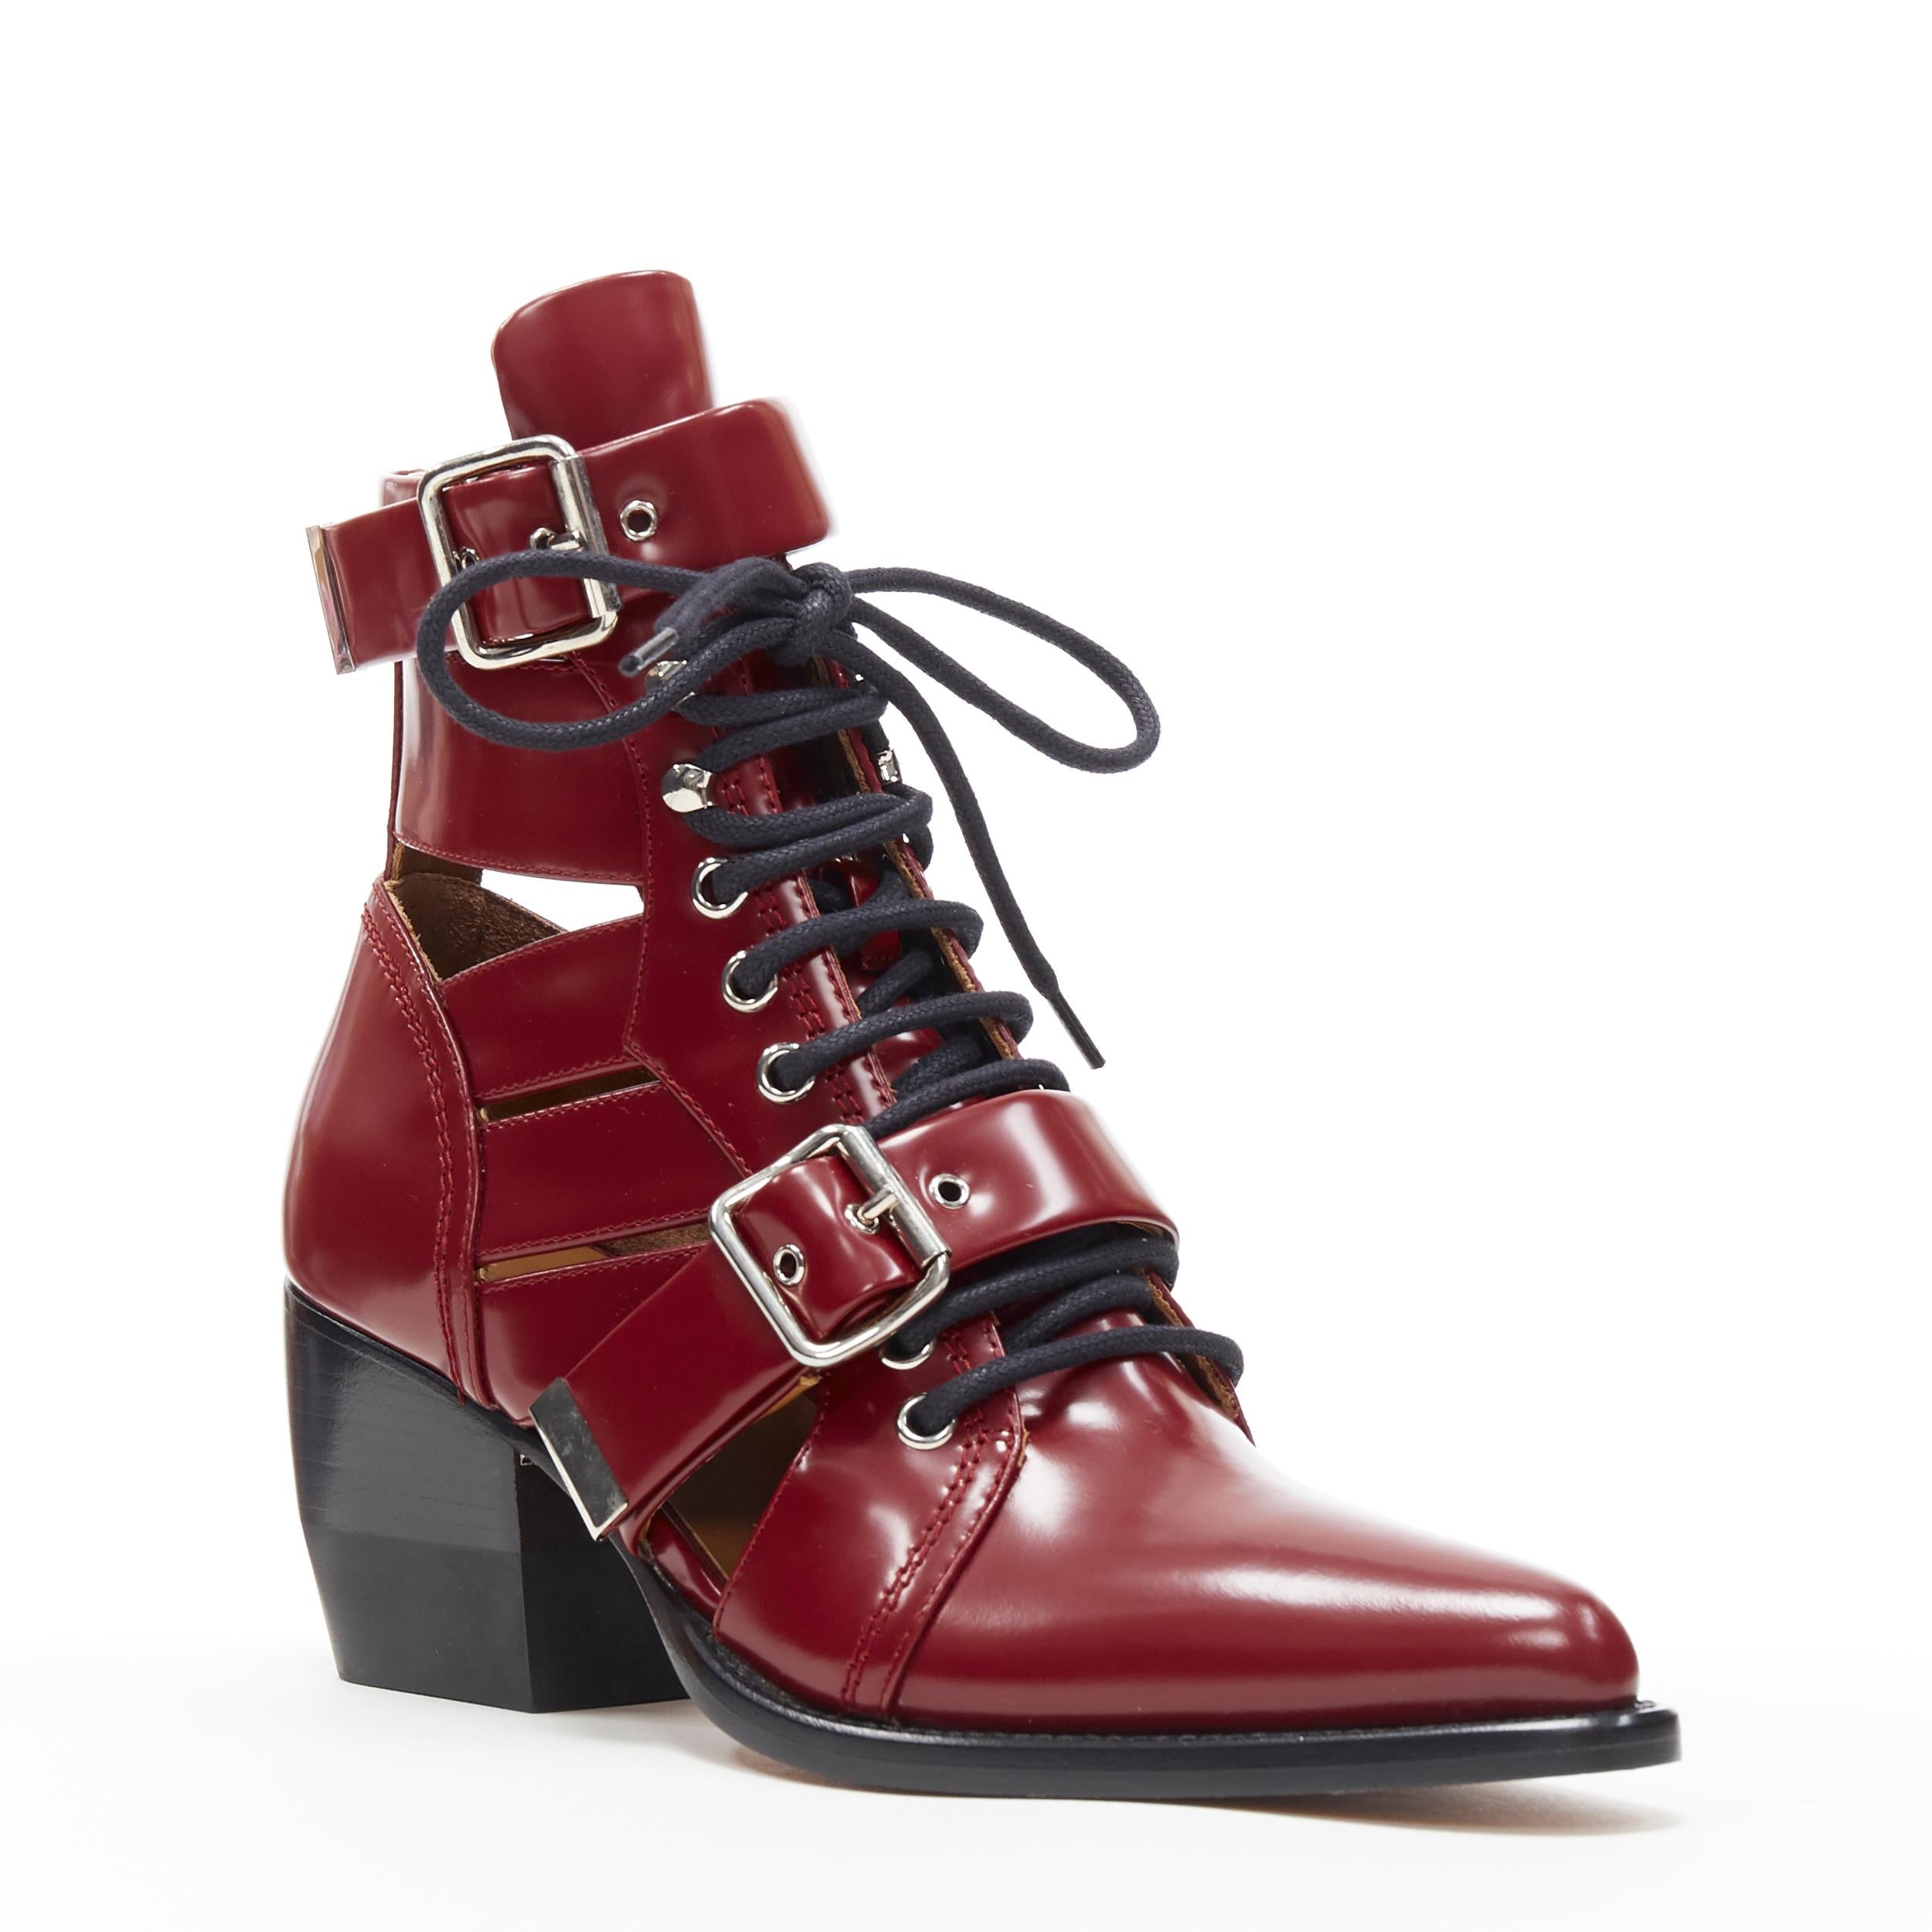 new CHLOE Rylee burgundy red leather cut out buckled pointy ankle boot EU39.5
Brand: Chloe
Model Name / Style: Rylee
Material: Leather
Color: Burgundy
Pattern: Solid
Closure: Lace up
Extra Detail: Signature Rylee boots by Chloe. Runway style. Ankle